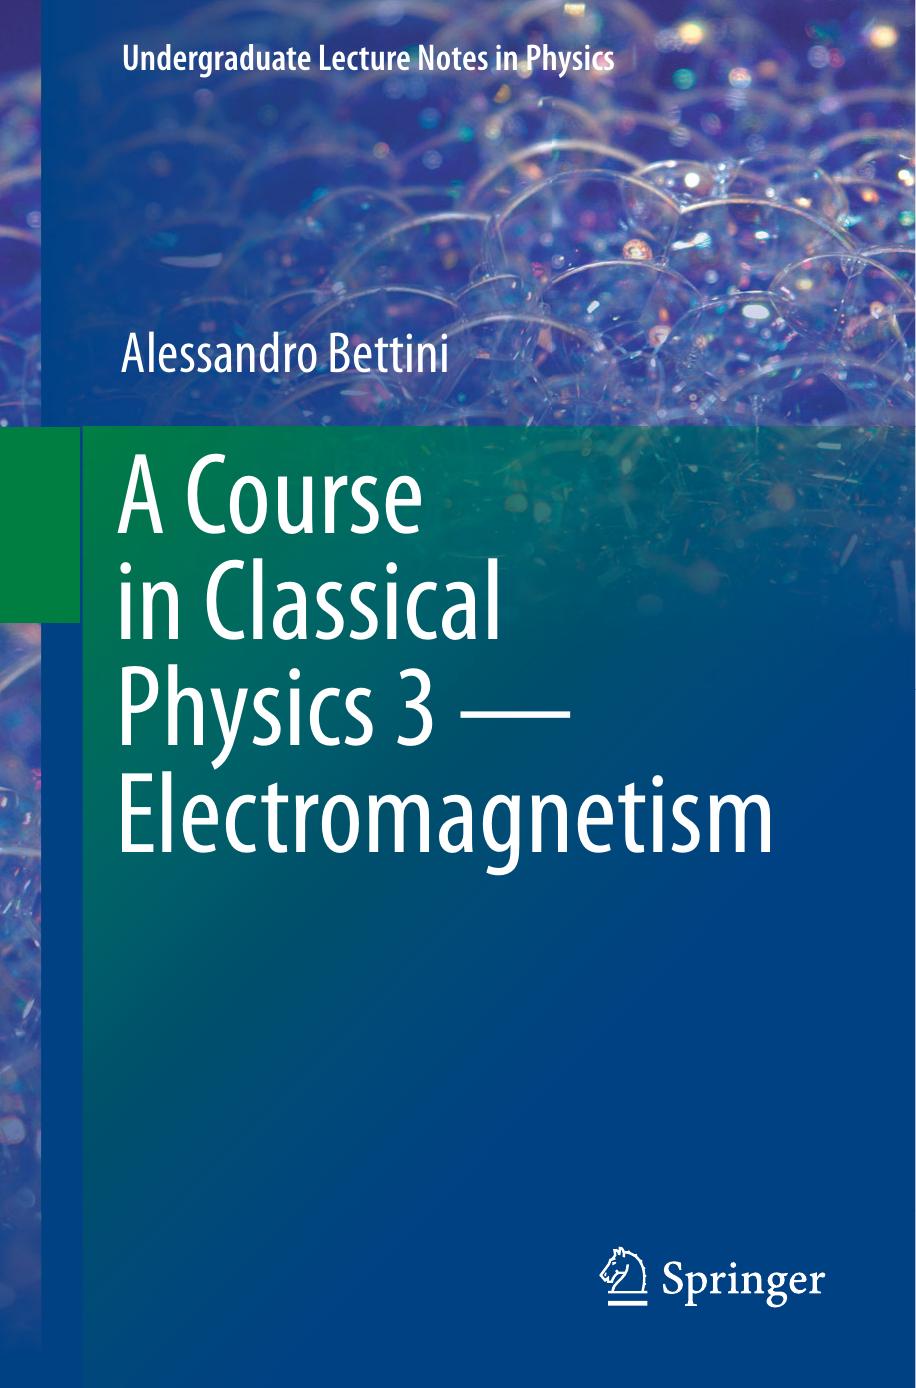 (Undergraduate Lecture Notes in Physics) Alessandro Bettini by A course in classical physics 3 Electromagnetism-Springer (2016)